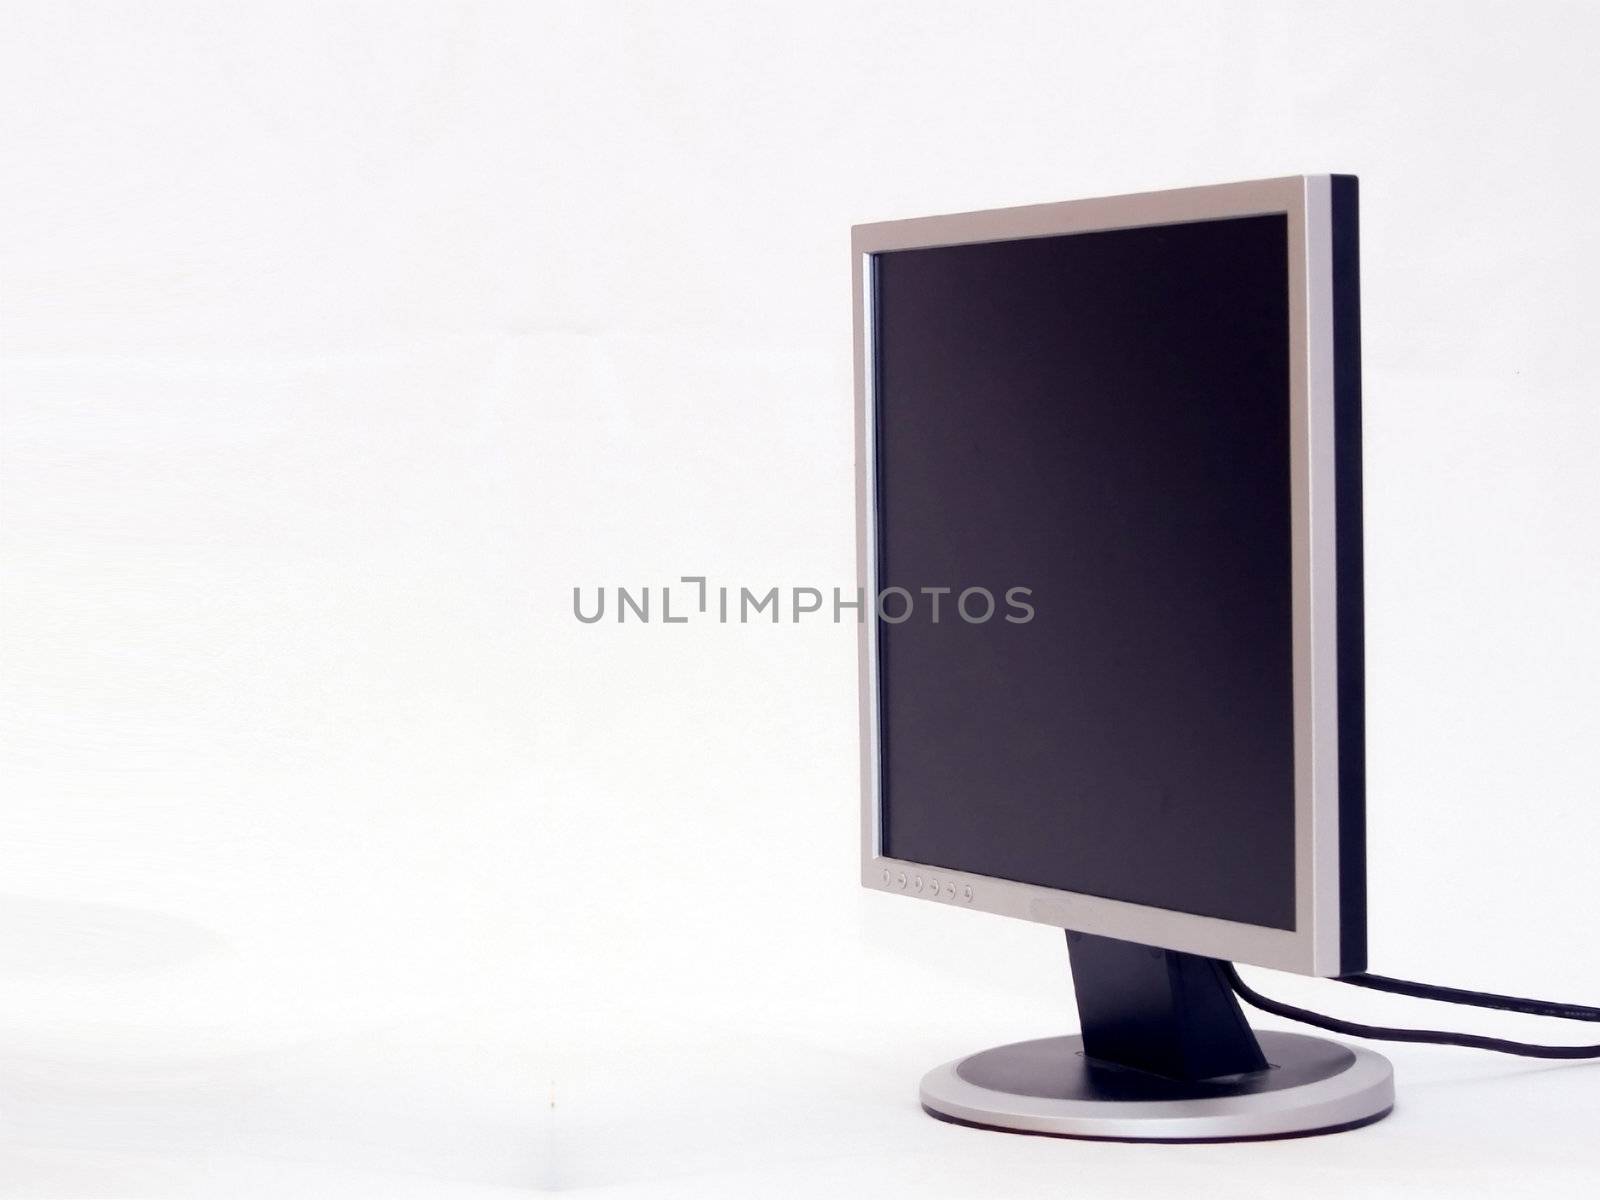  Computer on white background  by Baltus